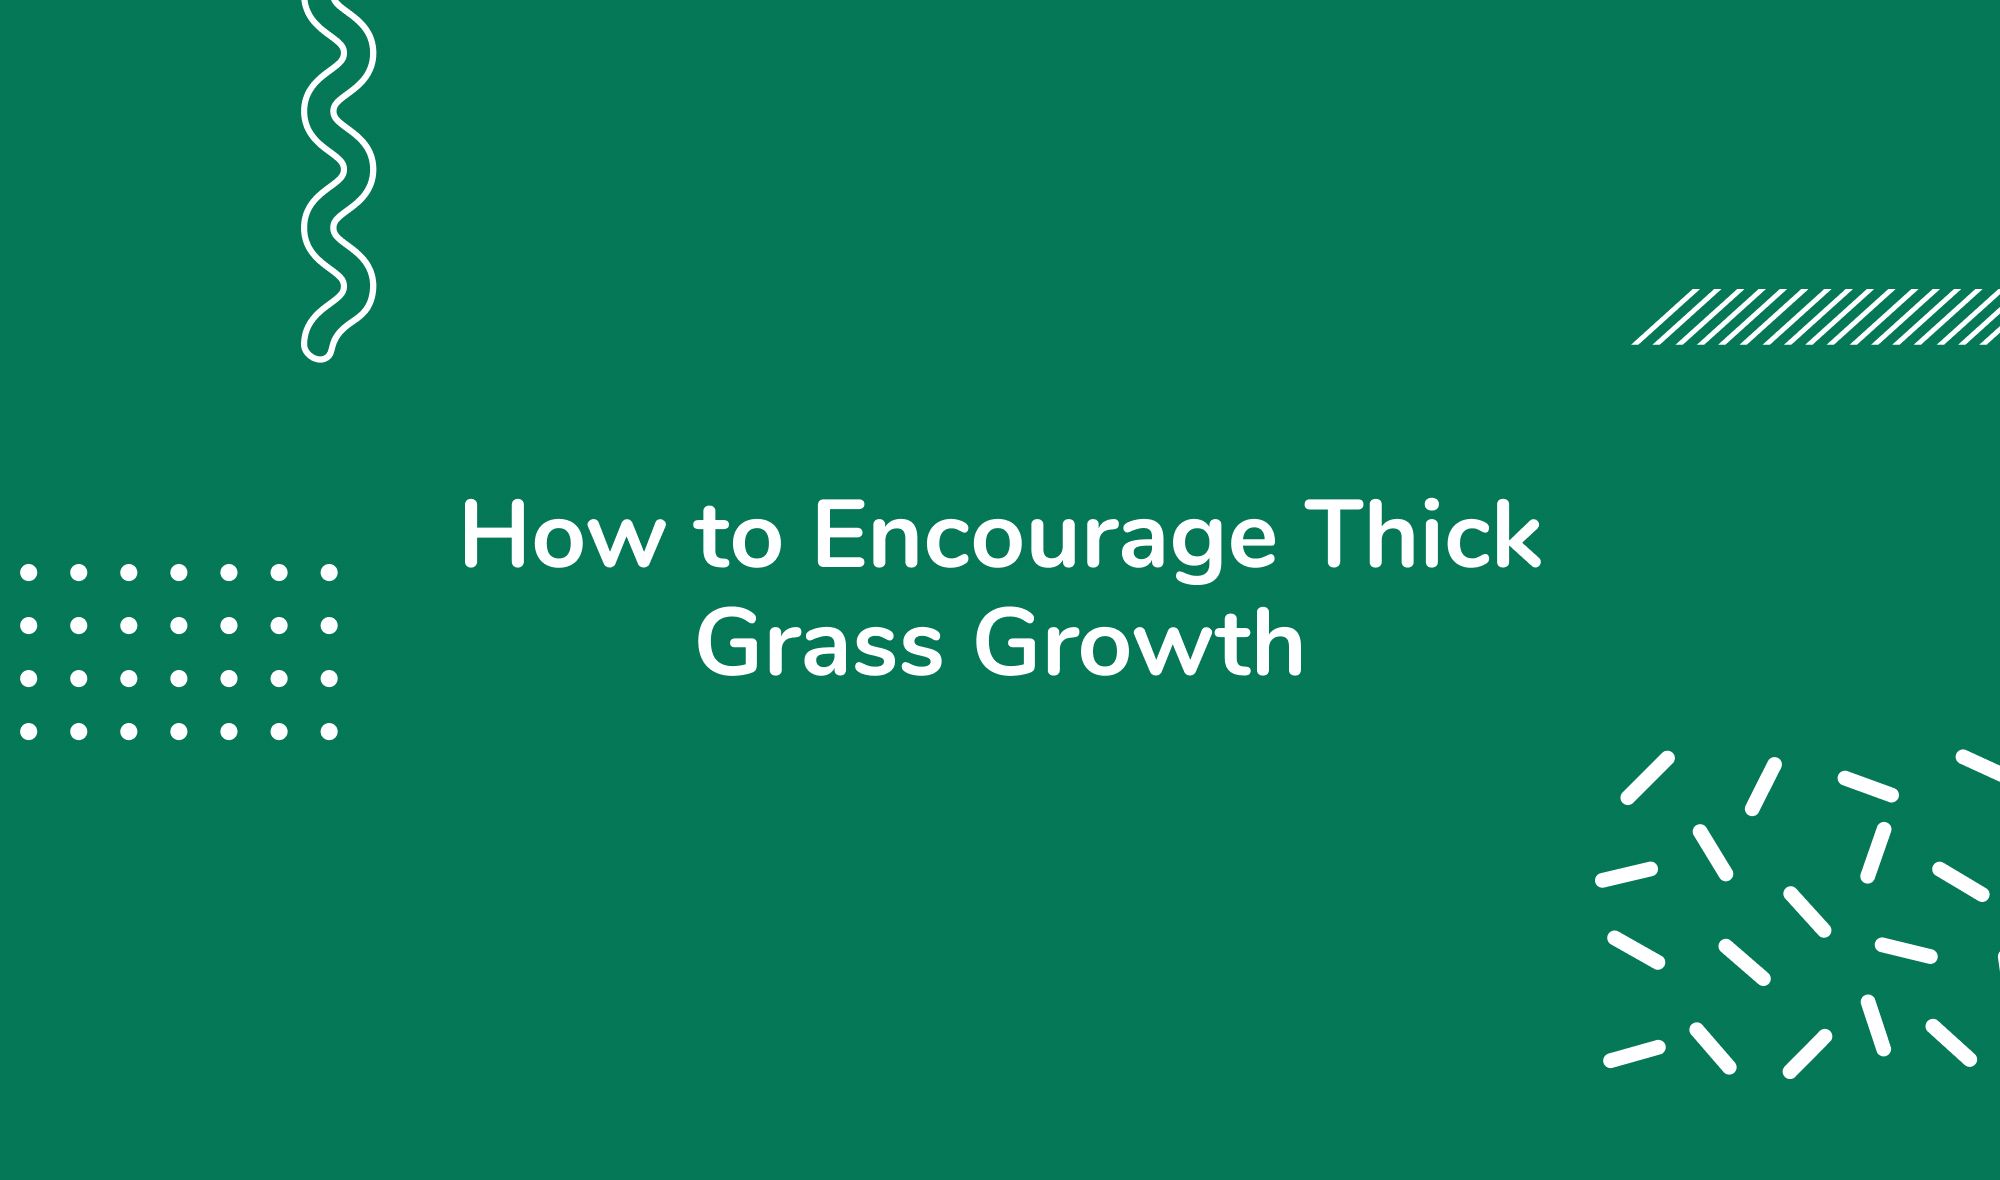 How to Encourage Thick Grass Growth